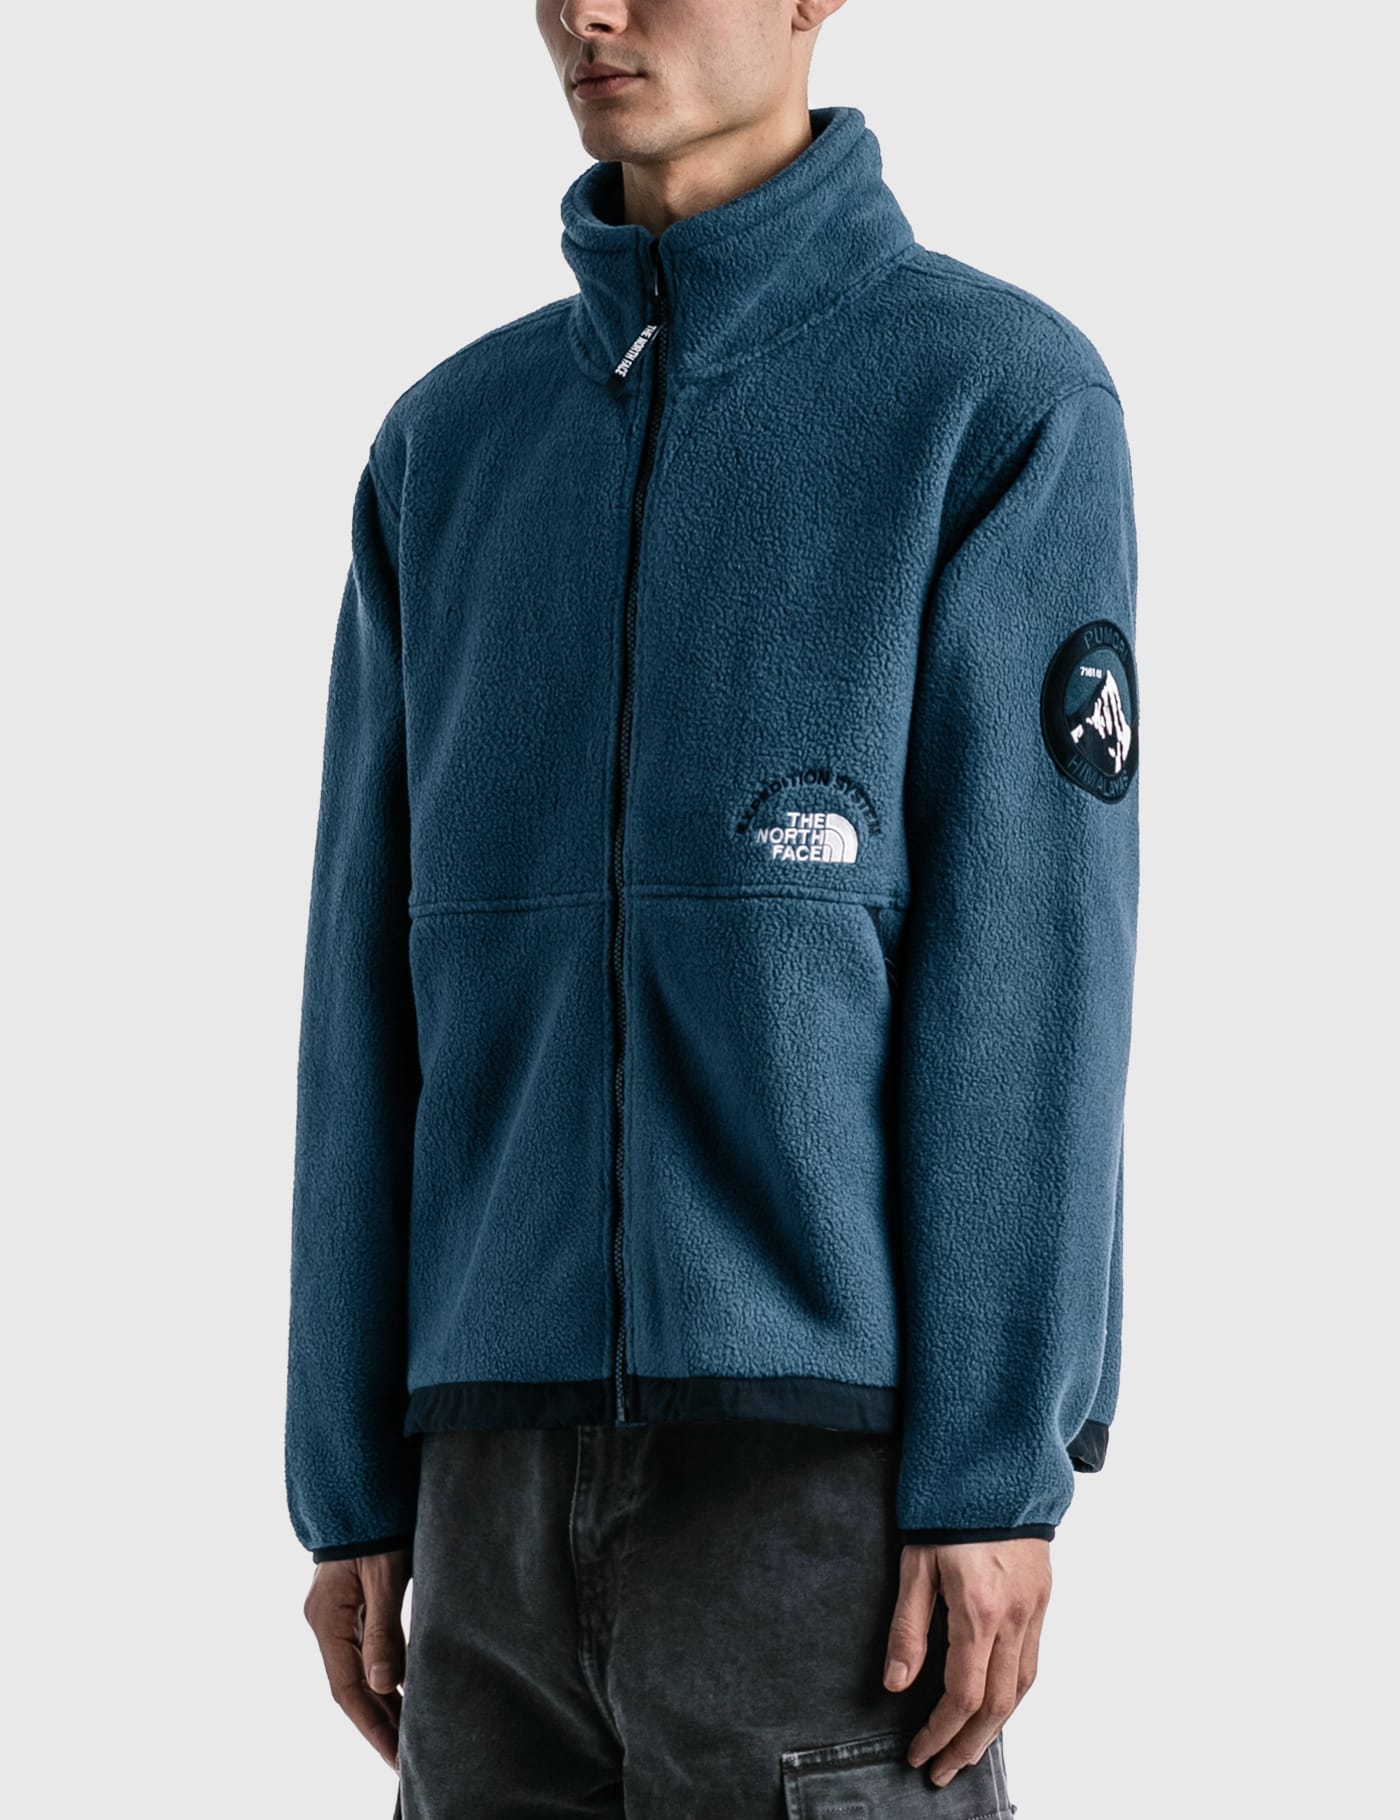 The North Face - NSE Pumori Expedition Jacket | HBX - Globally Curated  Fashion and Lifestyle by Hypebeast